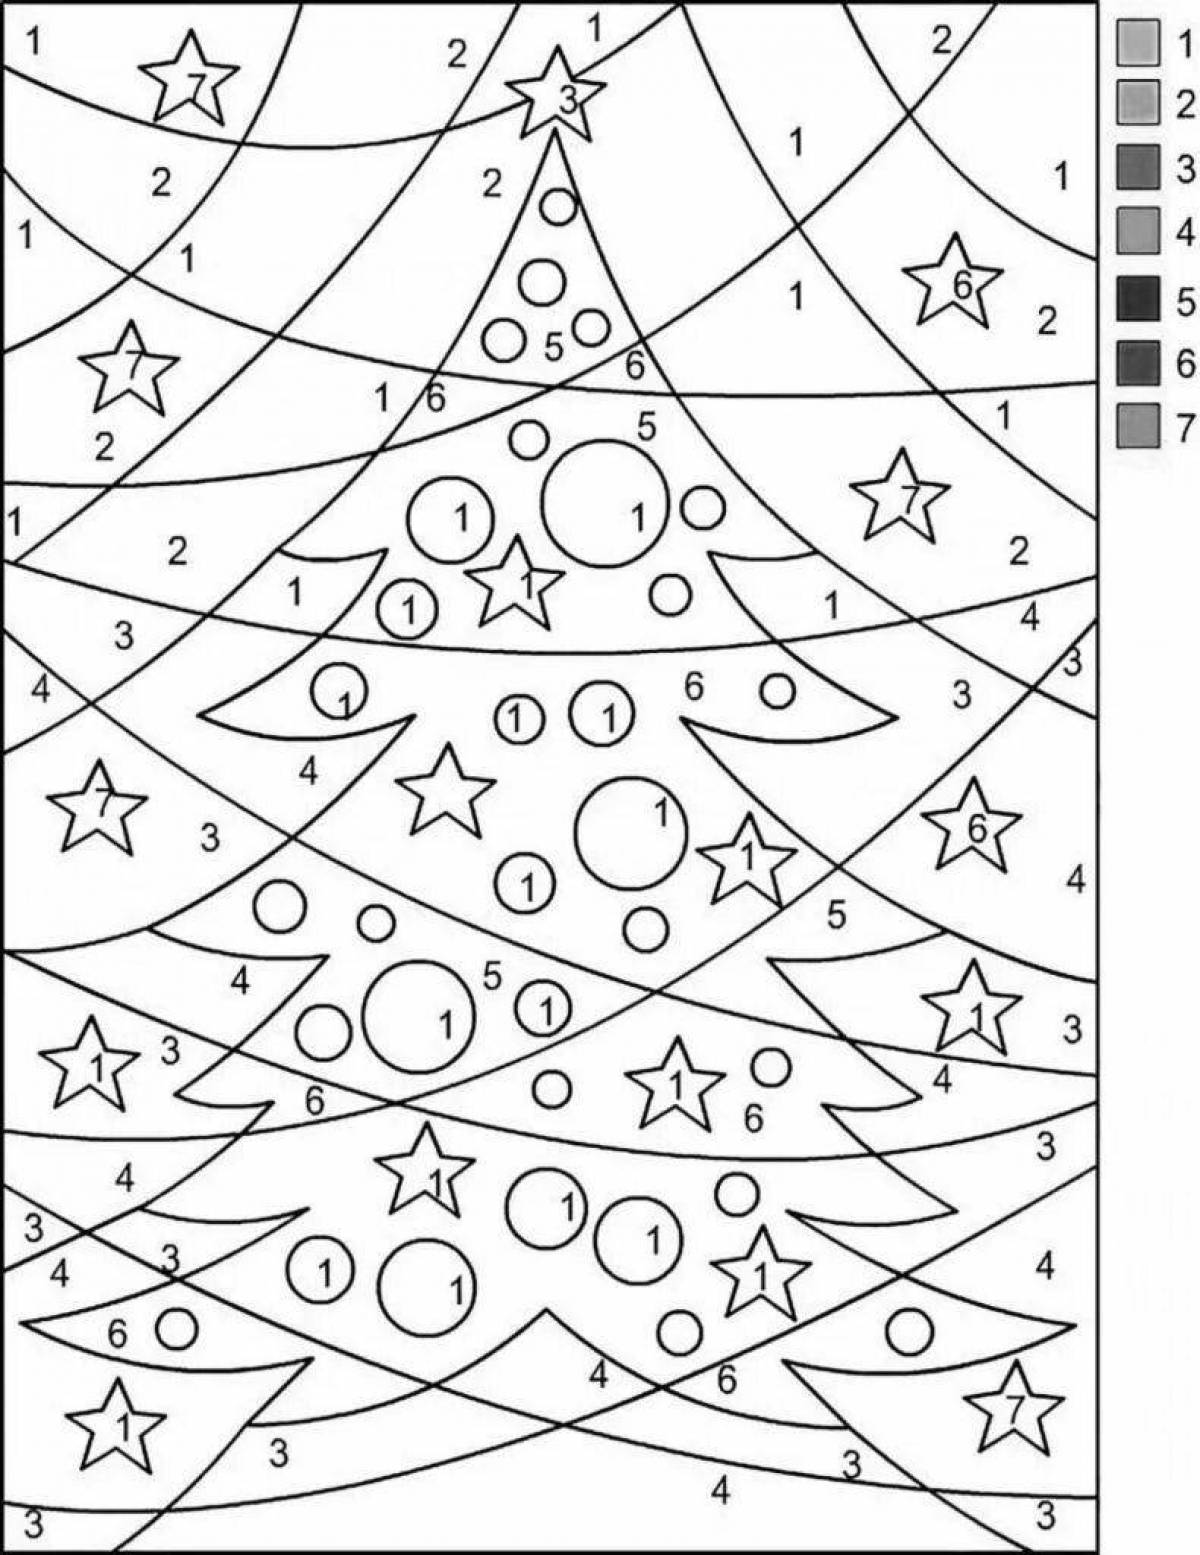 Fancy Christmas coloring book